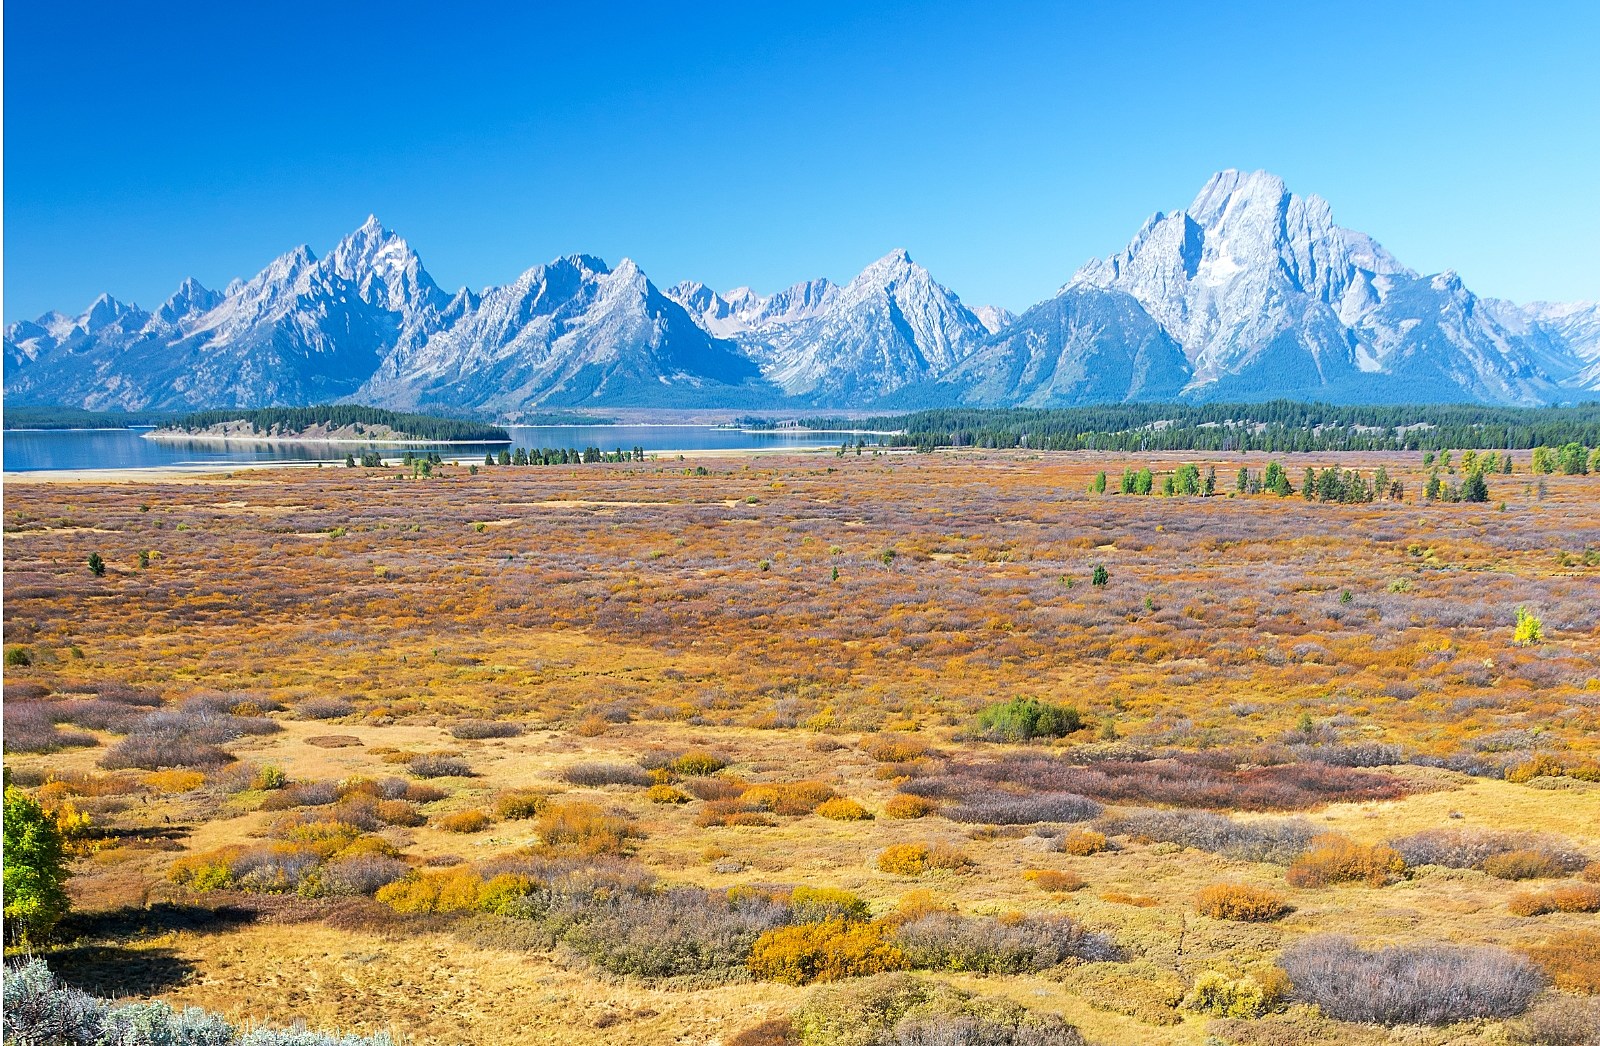 Wyoming holds off on auctioning huge piece of pristine land inside
Grand Teton